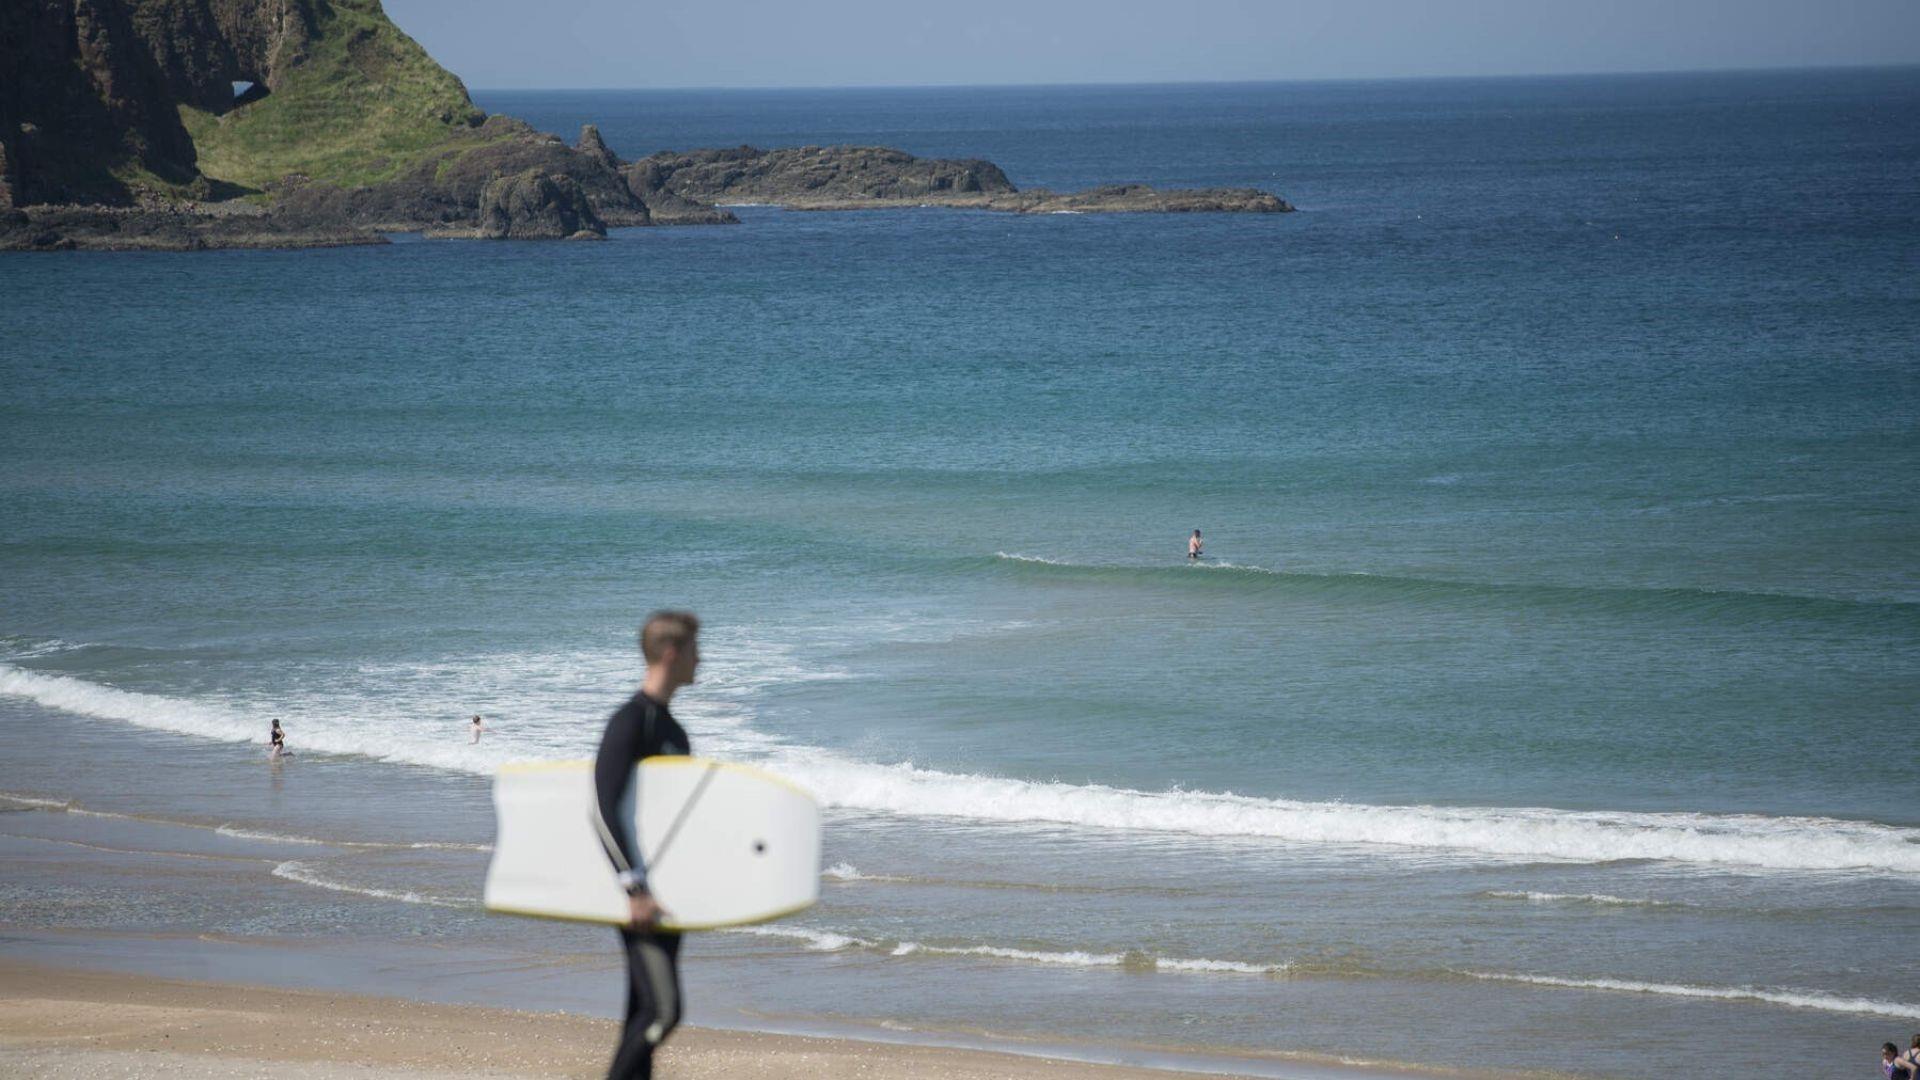 An image of the water at Whiterocks Beach with a surfer in the foreground